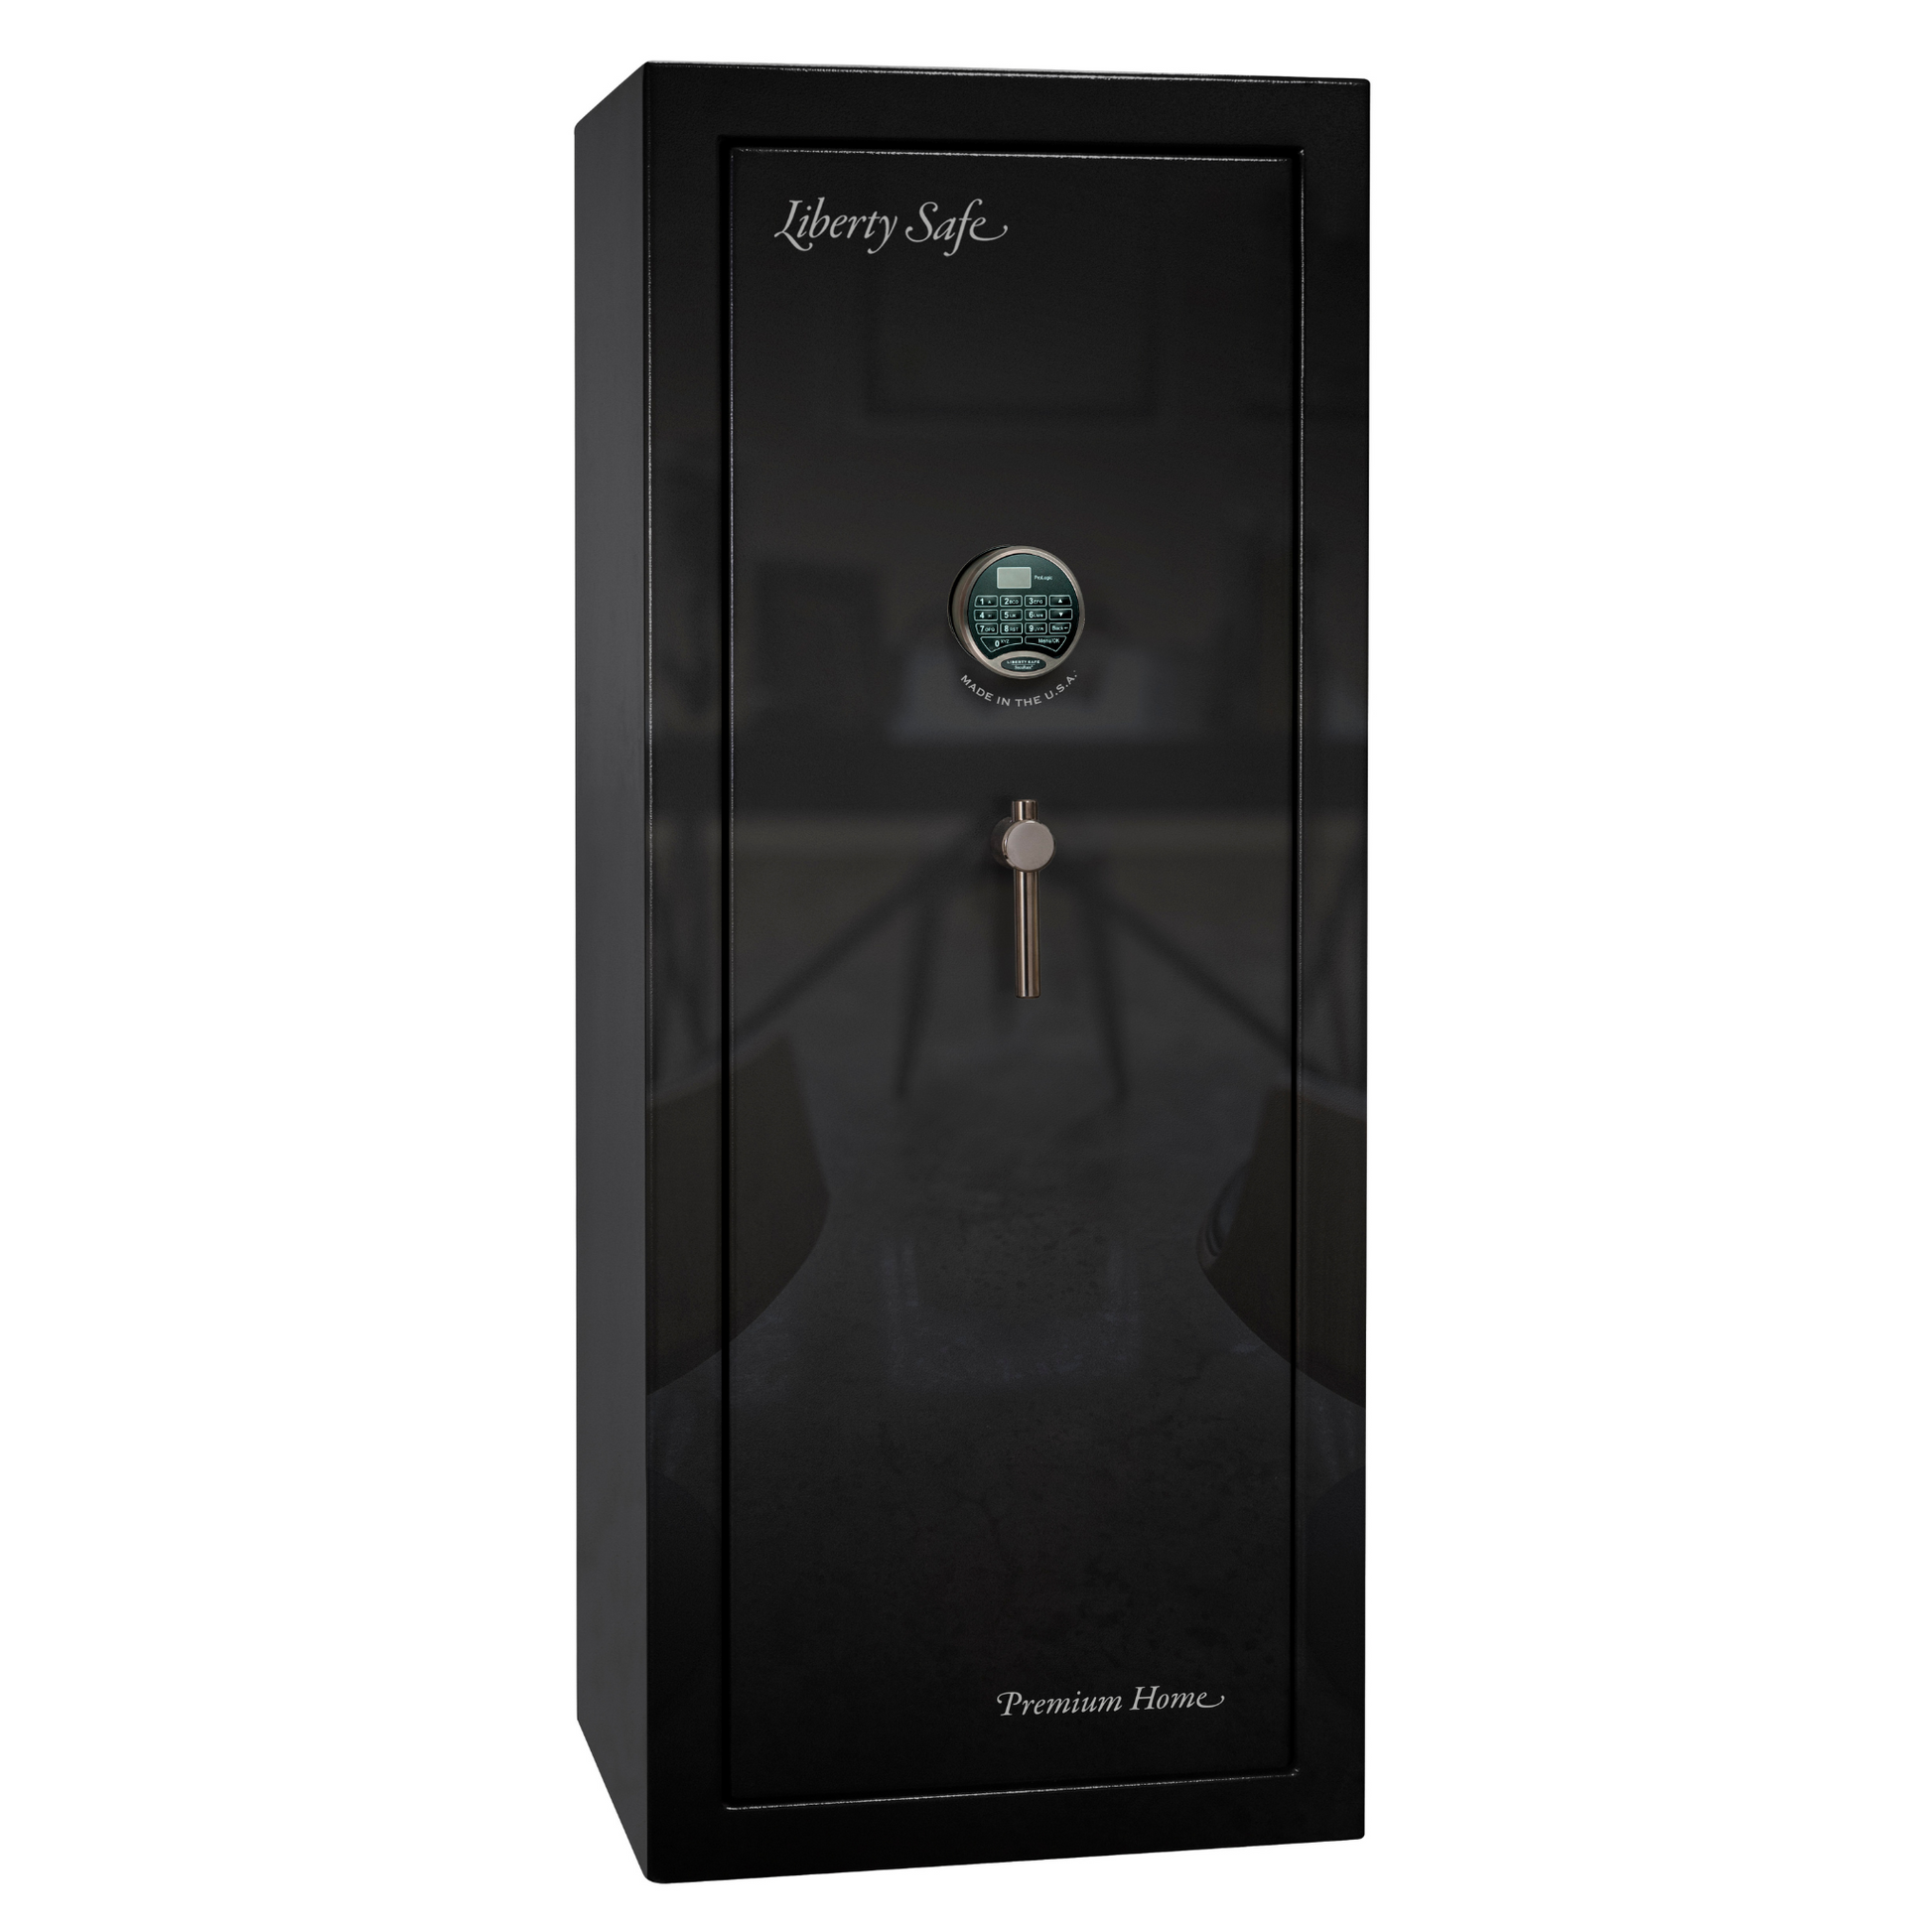 Premium Home Series | Level 7 Security | 2 Hour Fire Protection | 17 | Dimensions: 60.25"(H) x 24.5"(W) x 19"(D) | Black Gloss Black Chrome - Closed Door